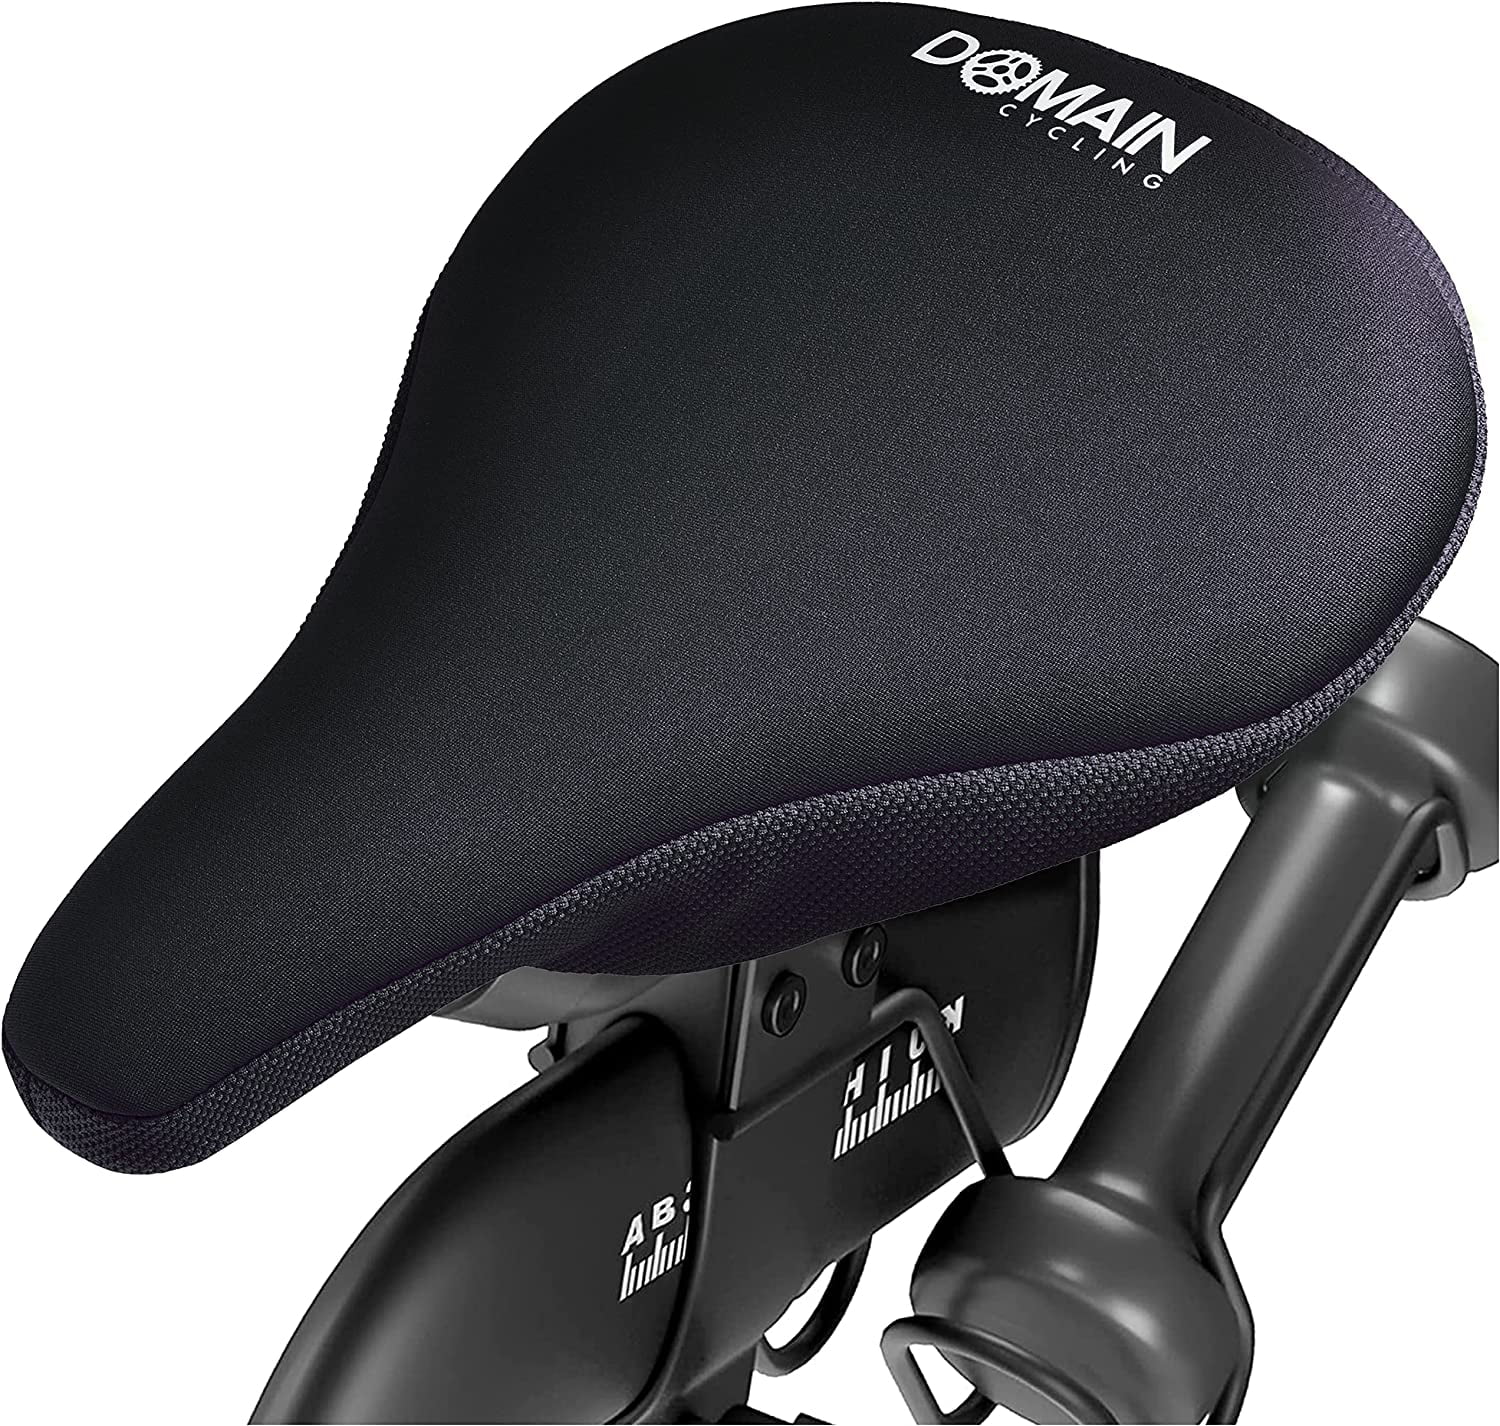 Elite Gel Bike Seat Cushion - Extra soft Bicycle saddle cover for spin,  exercise stationary bikes and outdoor Biking - Premium accessories for  comfort while cycling 